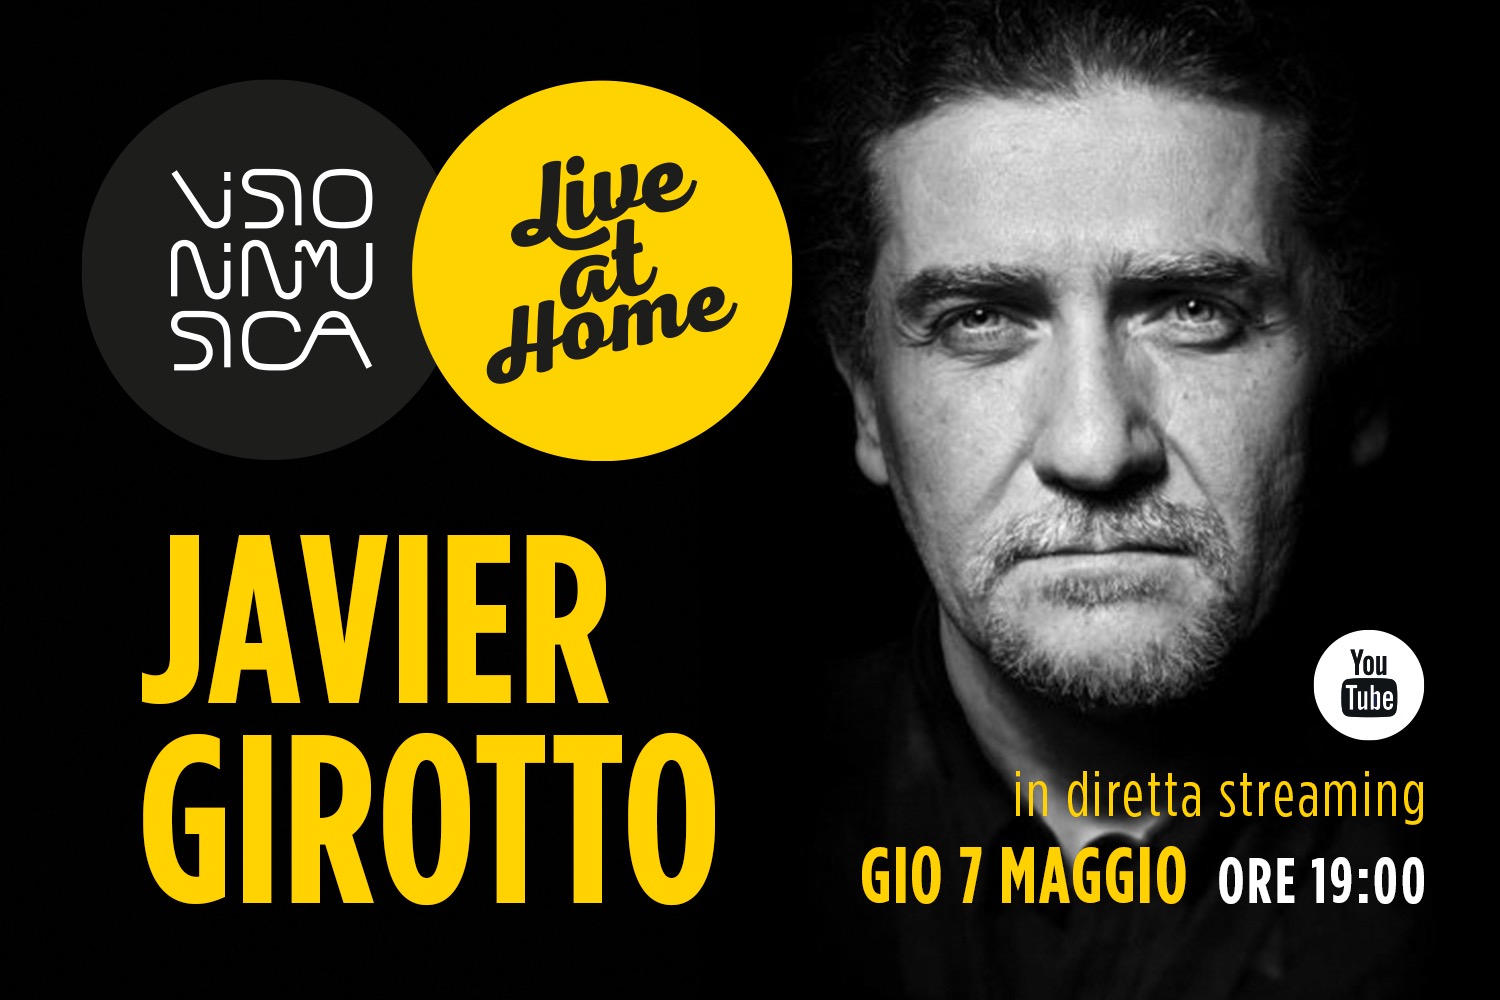 You are currently viewing VIM “Live at home”: JAVIER GIROTTO (7 maggio, ore 19:00)